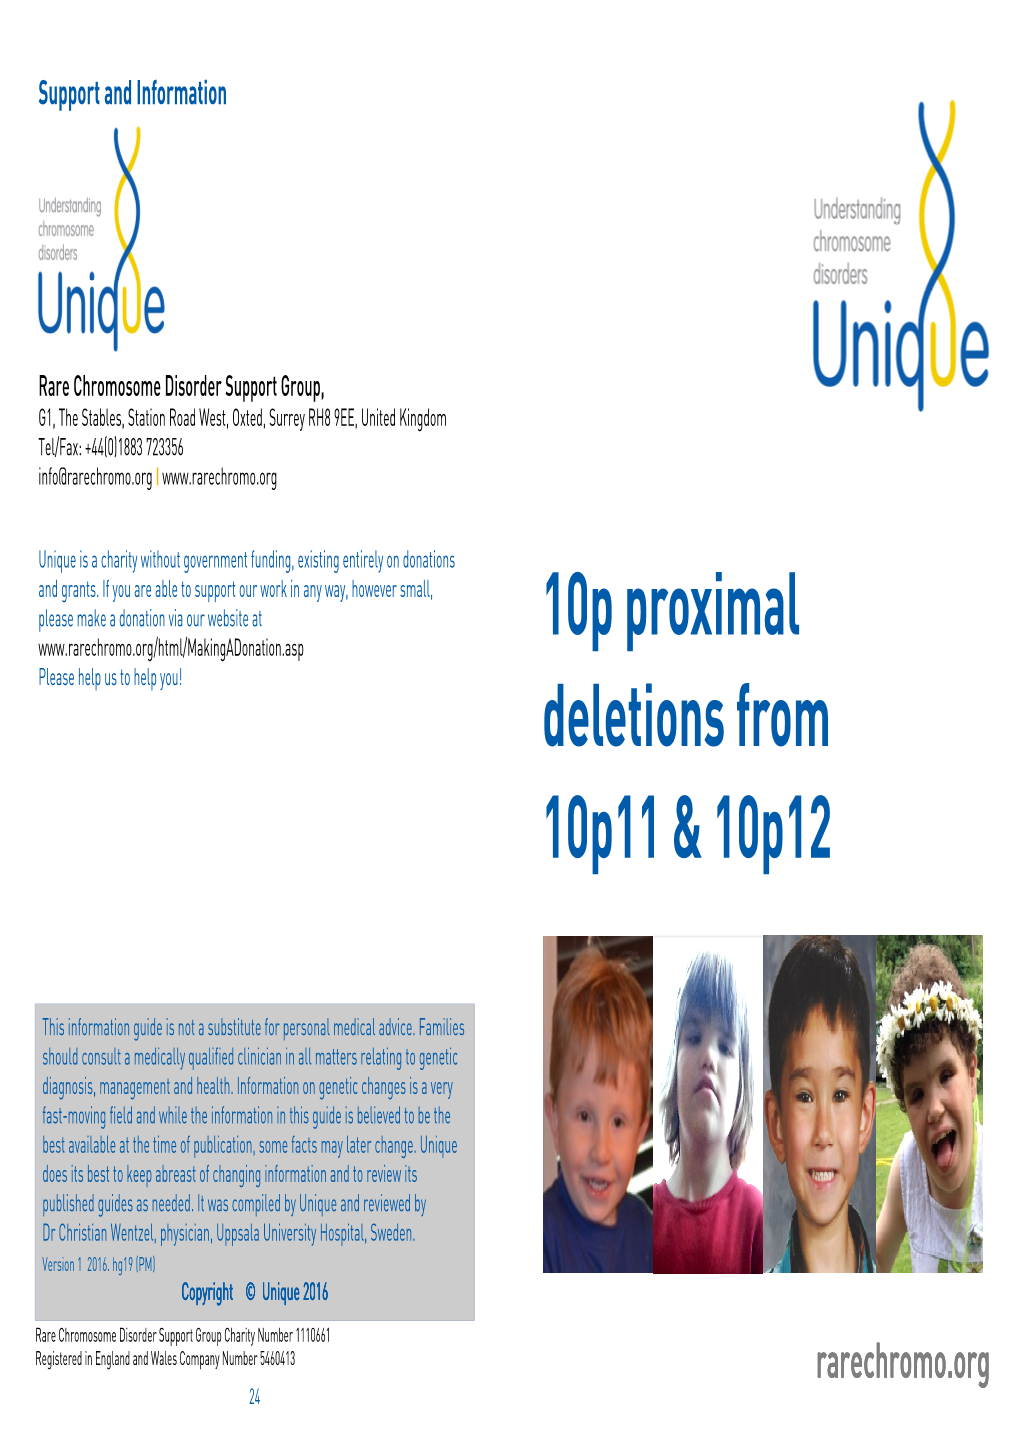 10P Proximal Deletions from 10P11 and 10P12 FTNP